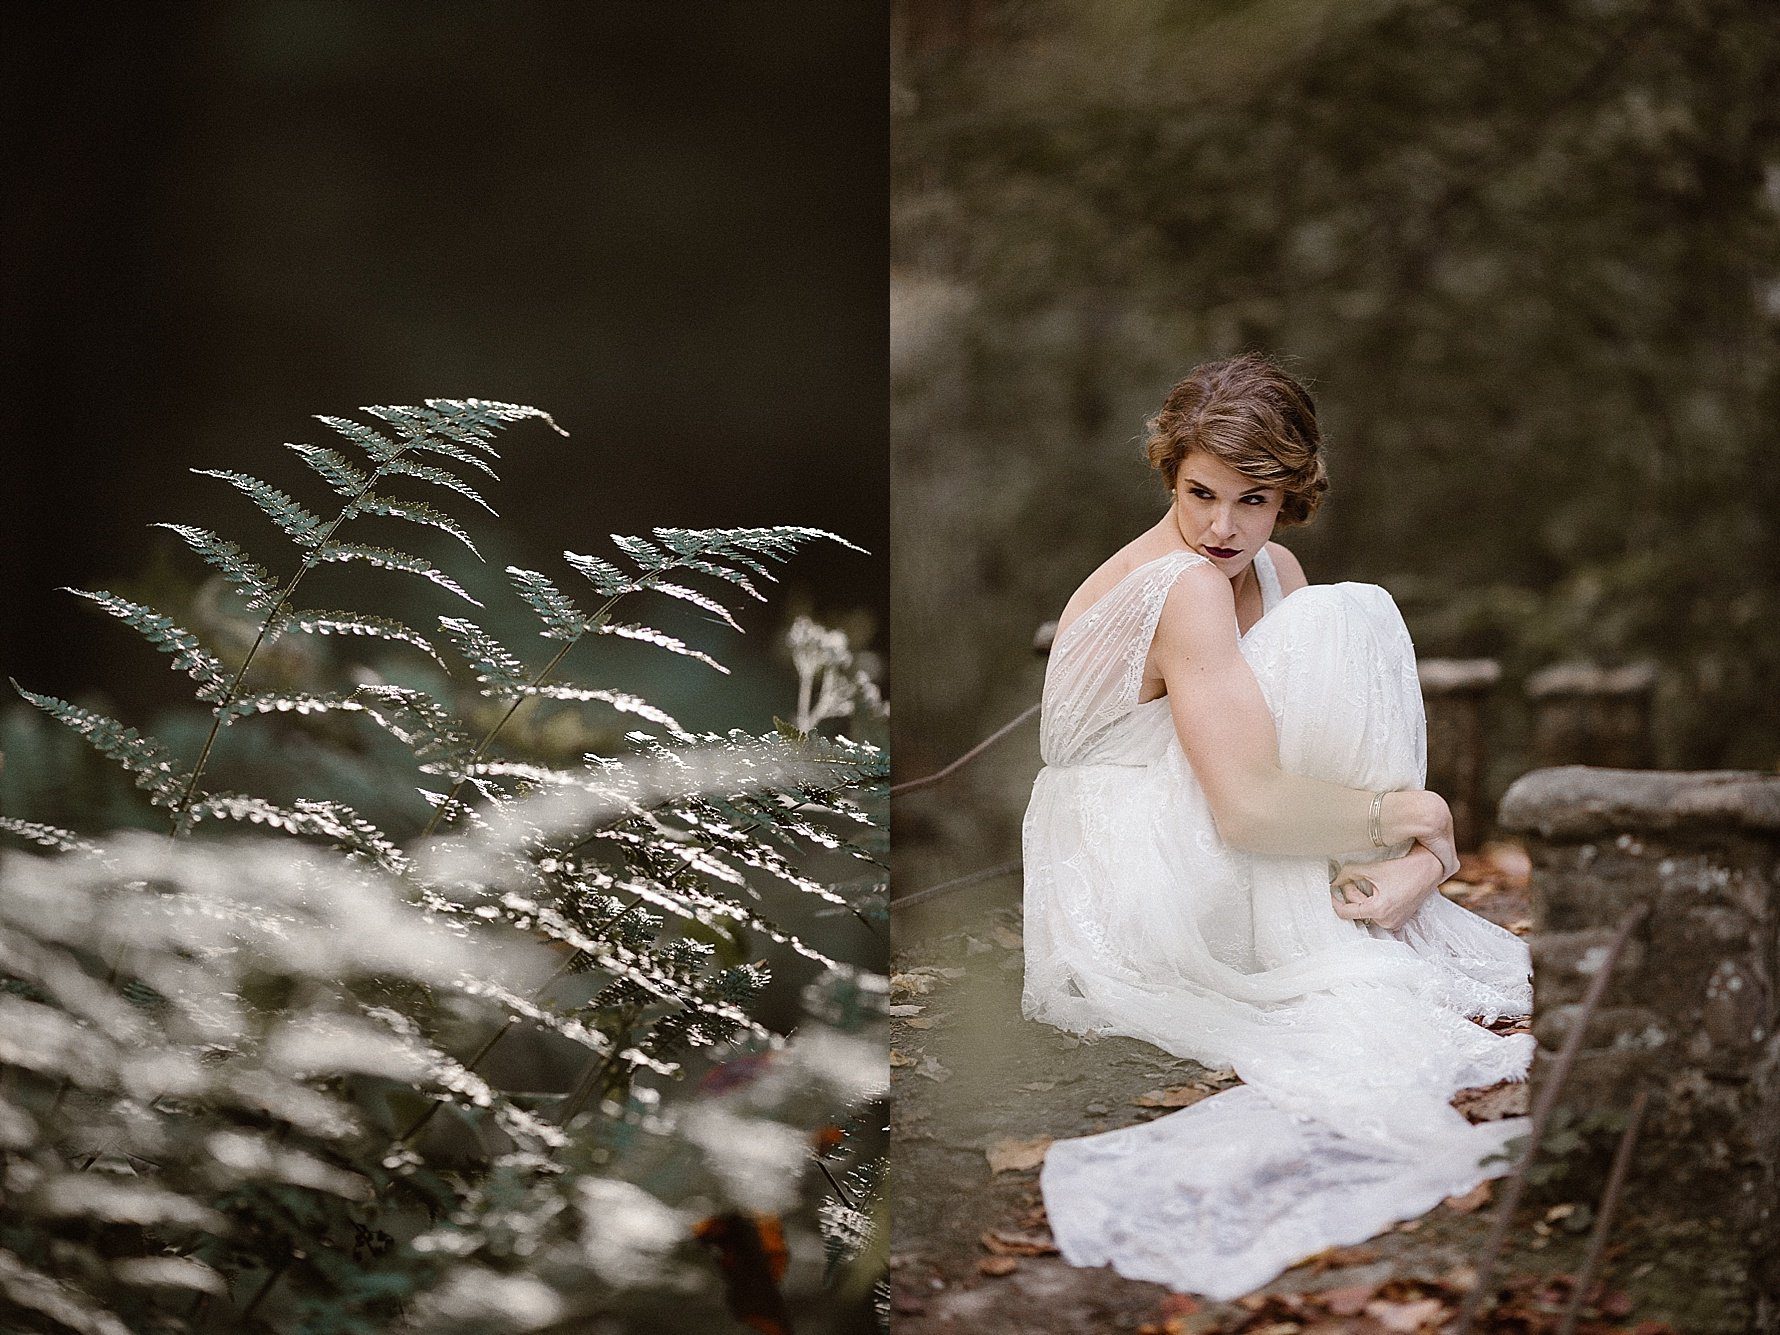 Woodsy Bridal Photos in Tennessee | Erin Morrison Photography www.erinmorrisonphotography.com